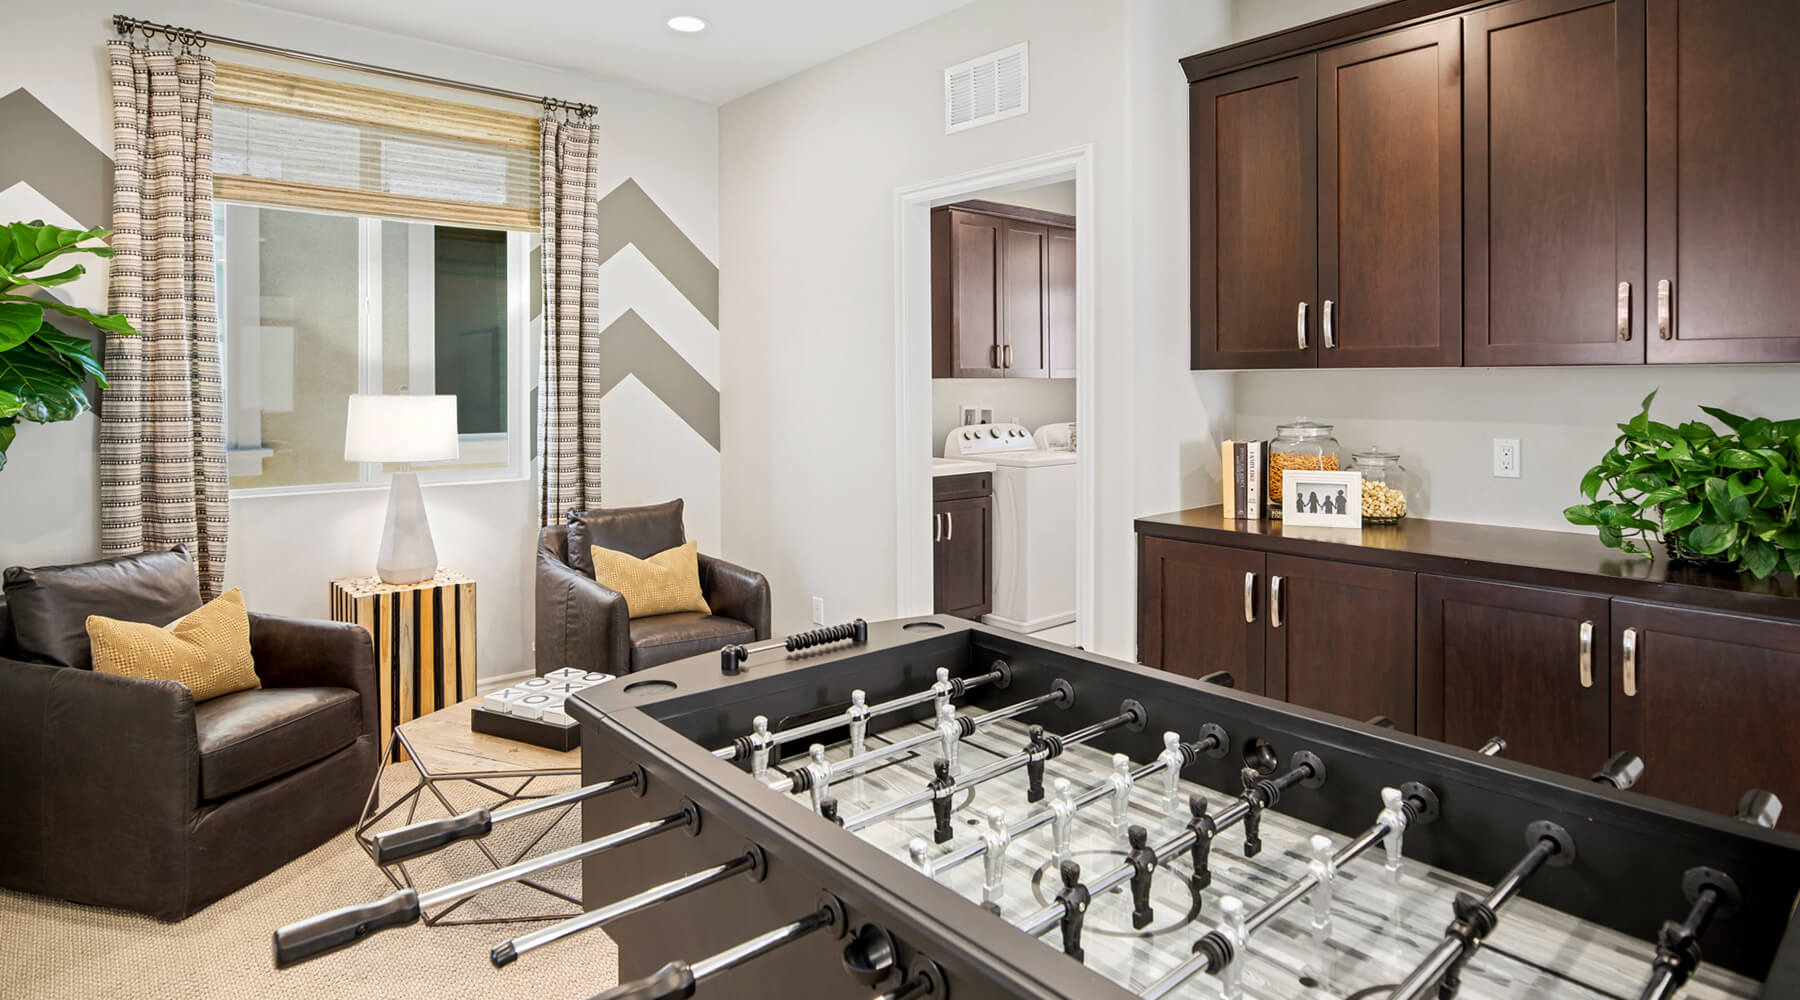 Game room at Cabrillo Crossing new townhomes for sale